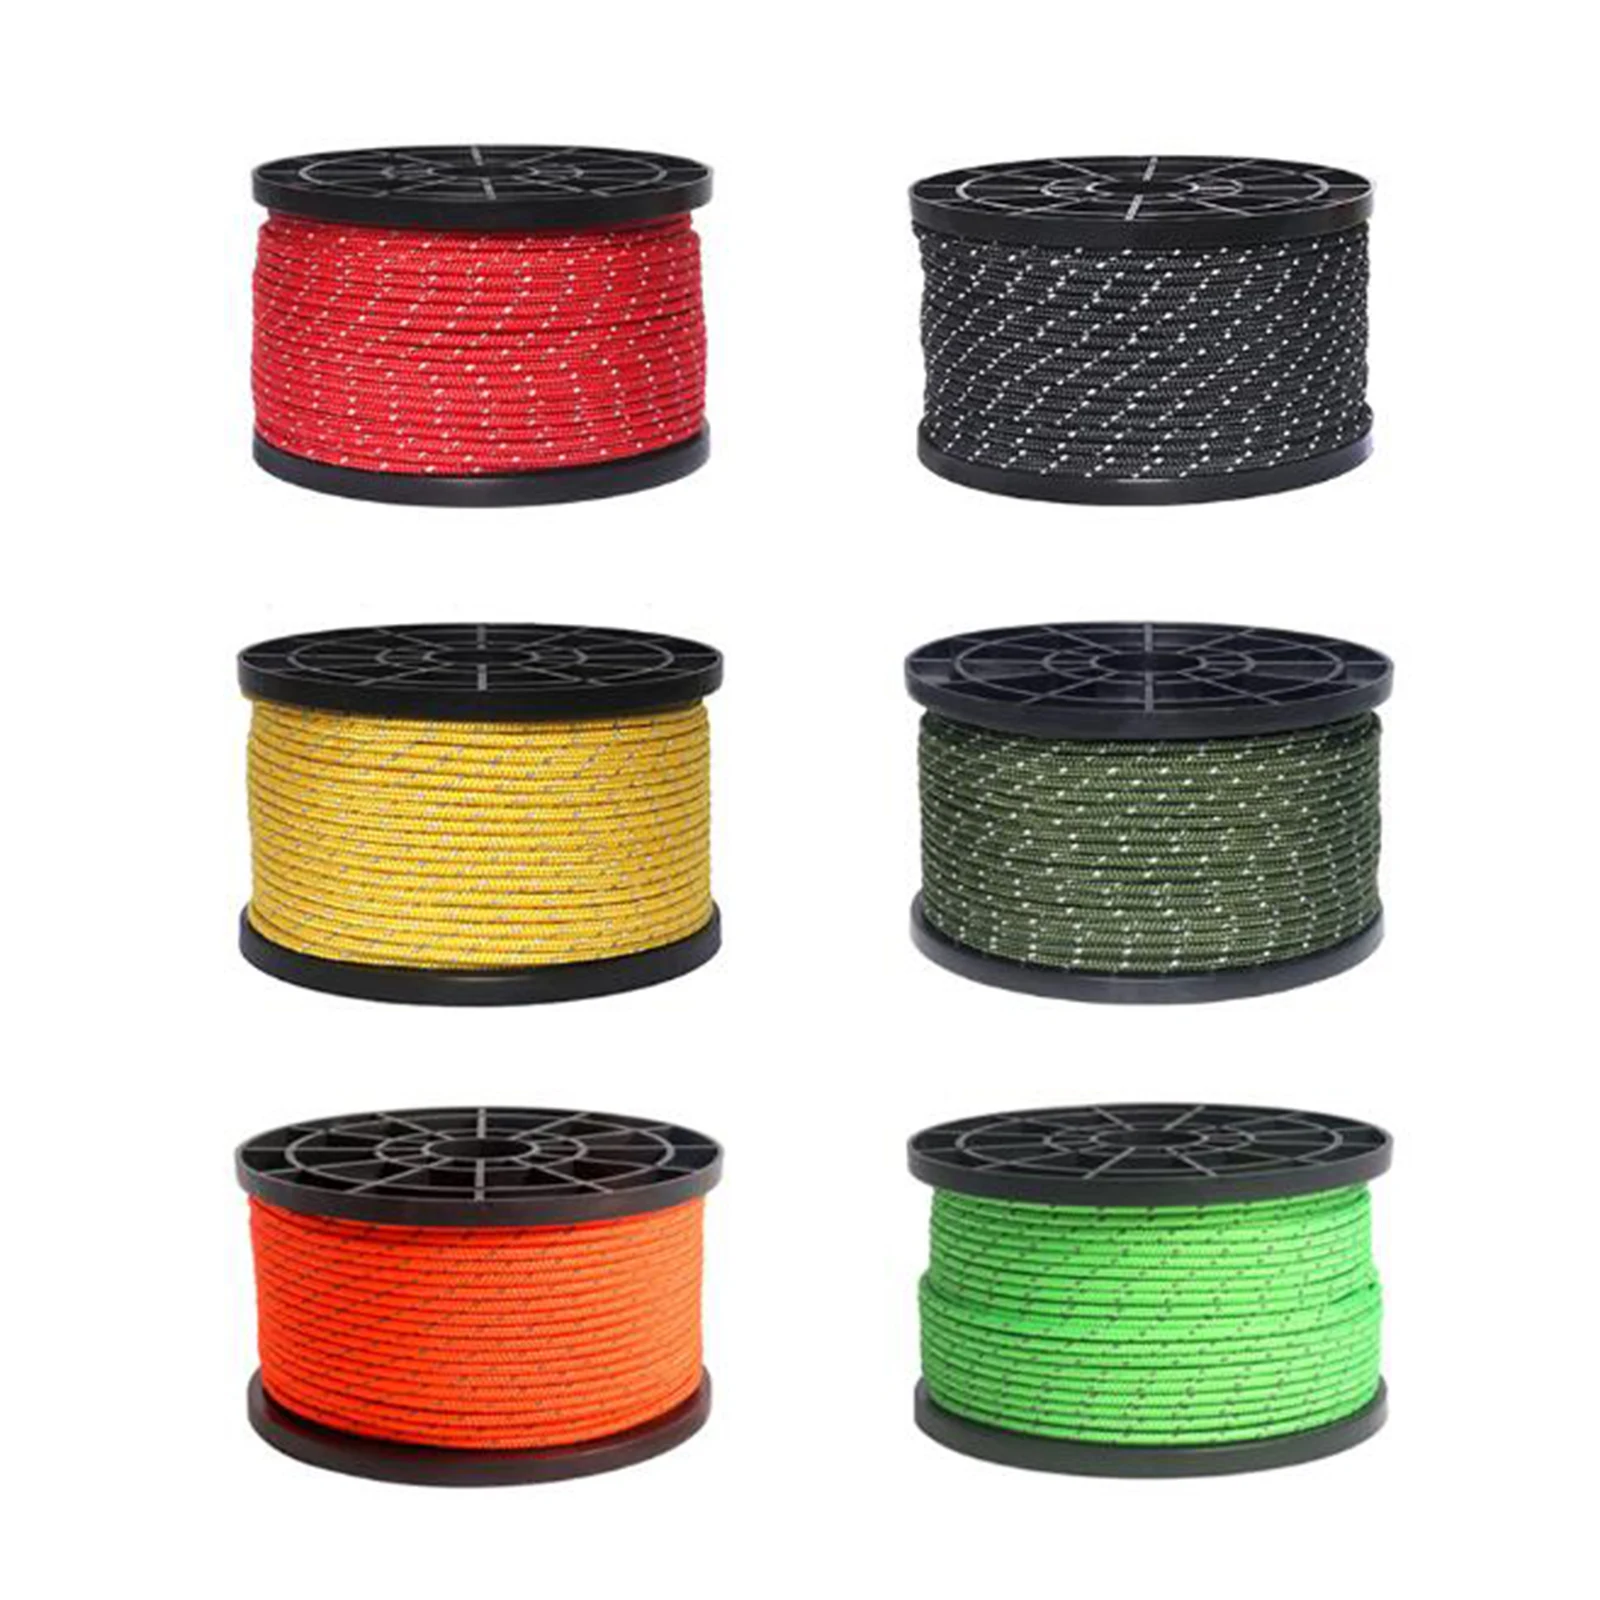 55 Yard Reflective Guyline Tent Awning Gazebo Rope Cord Paracord Guide Camping Accessories